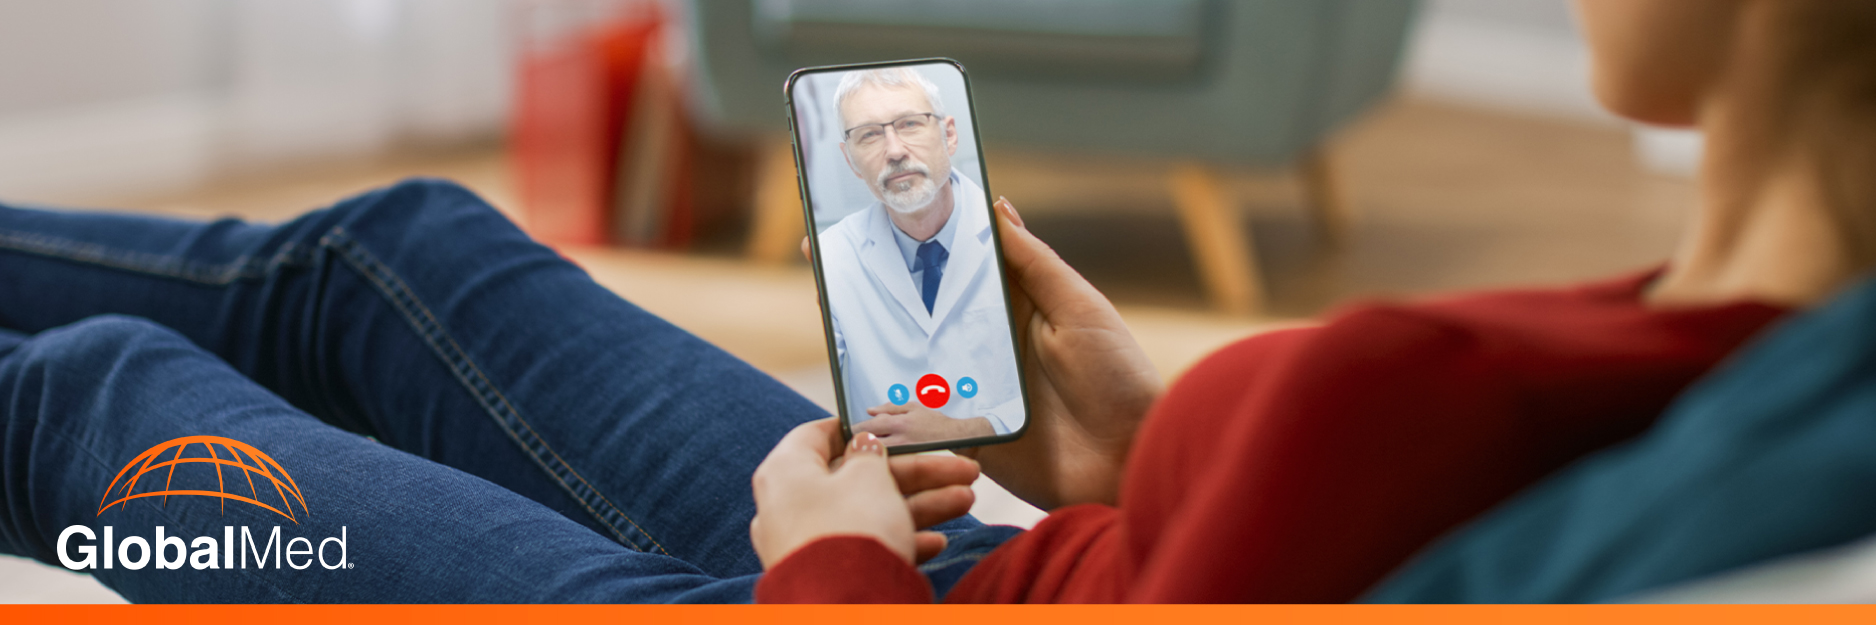 Reaching patients at home through telehealth.